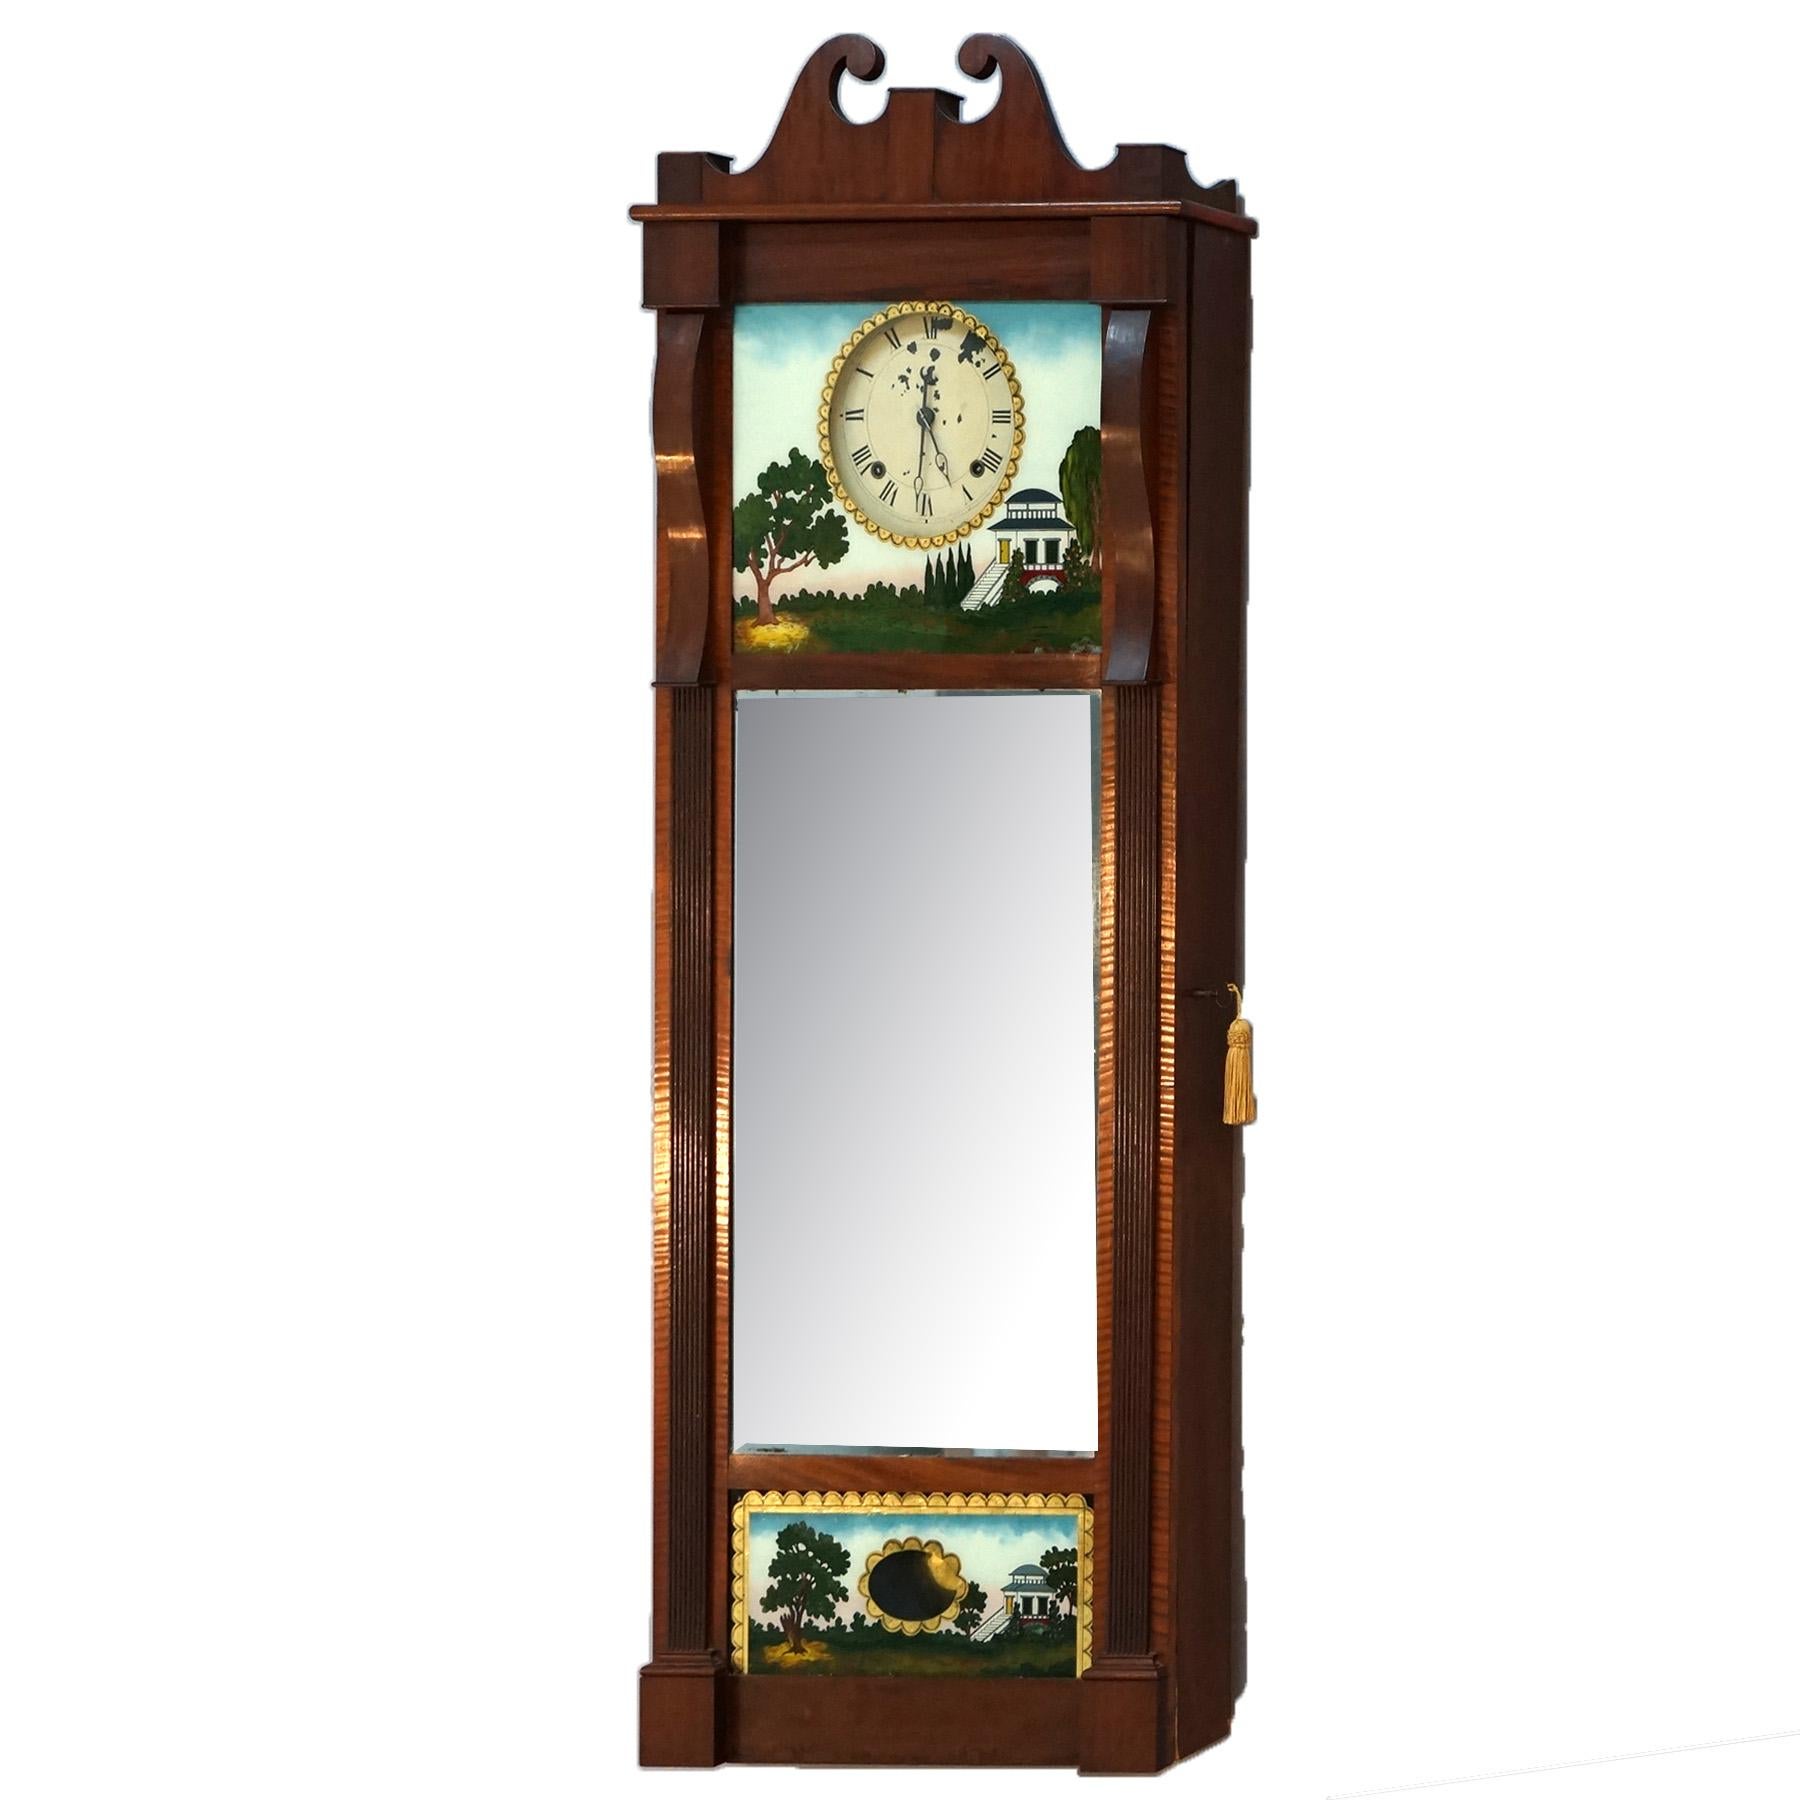 Hand-Painted Oversized Antique American Empire Hand Painted Eglomise Panel Wall Clock C1840 For Sale